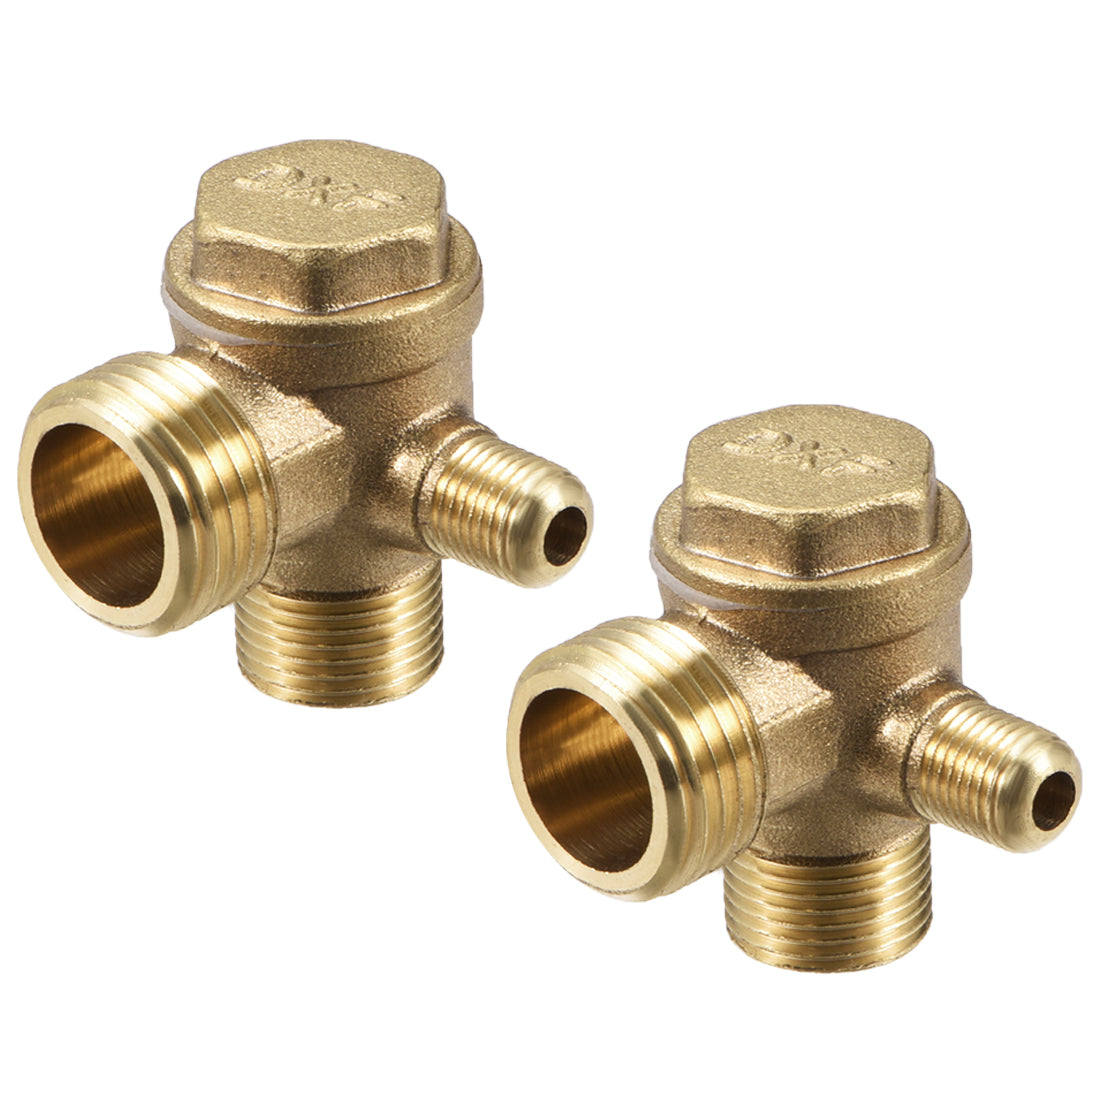 uxcell Uxcell Air Compressor Check Valve 90 Degree Male Threaded Brass 3/8PTx1/2PTxM10 2Pcs